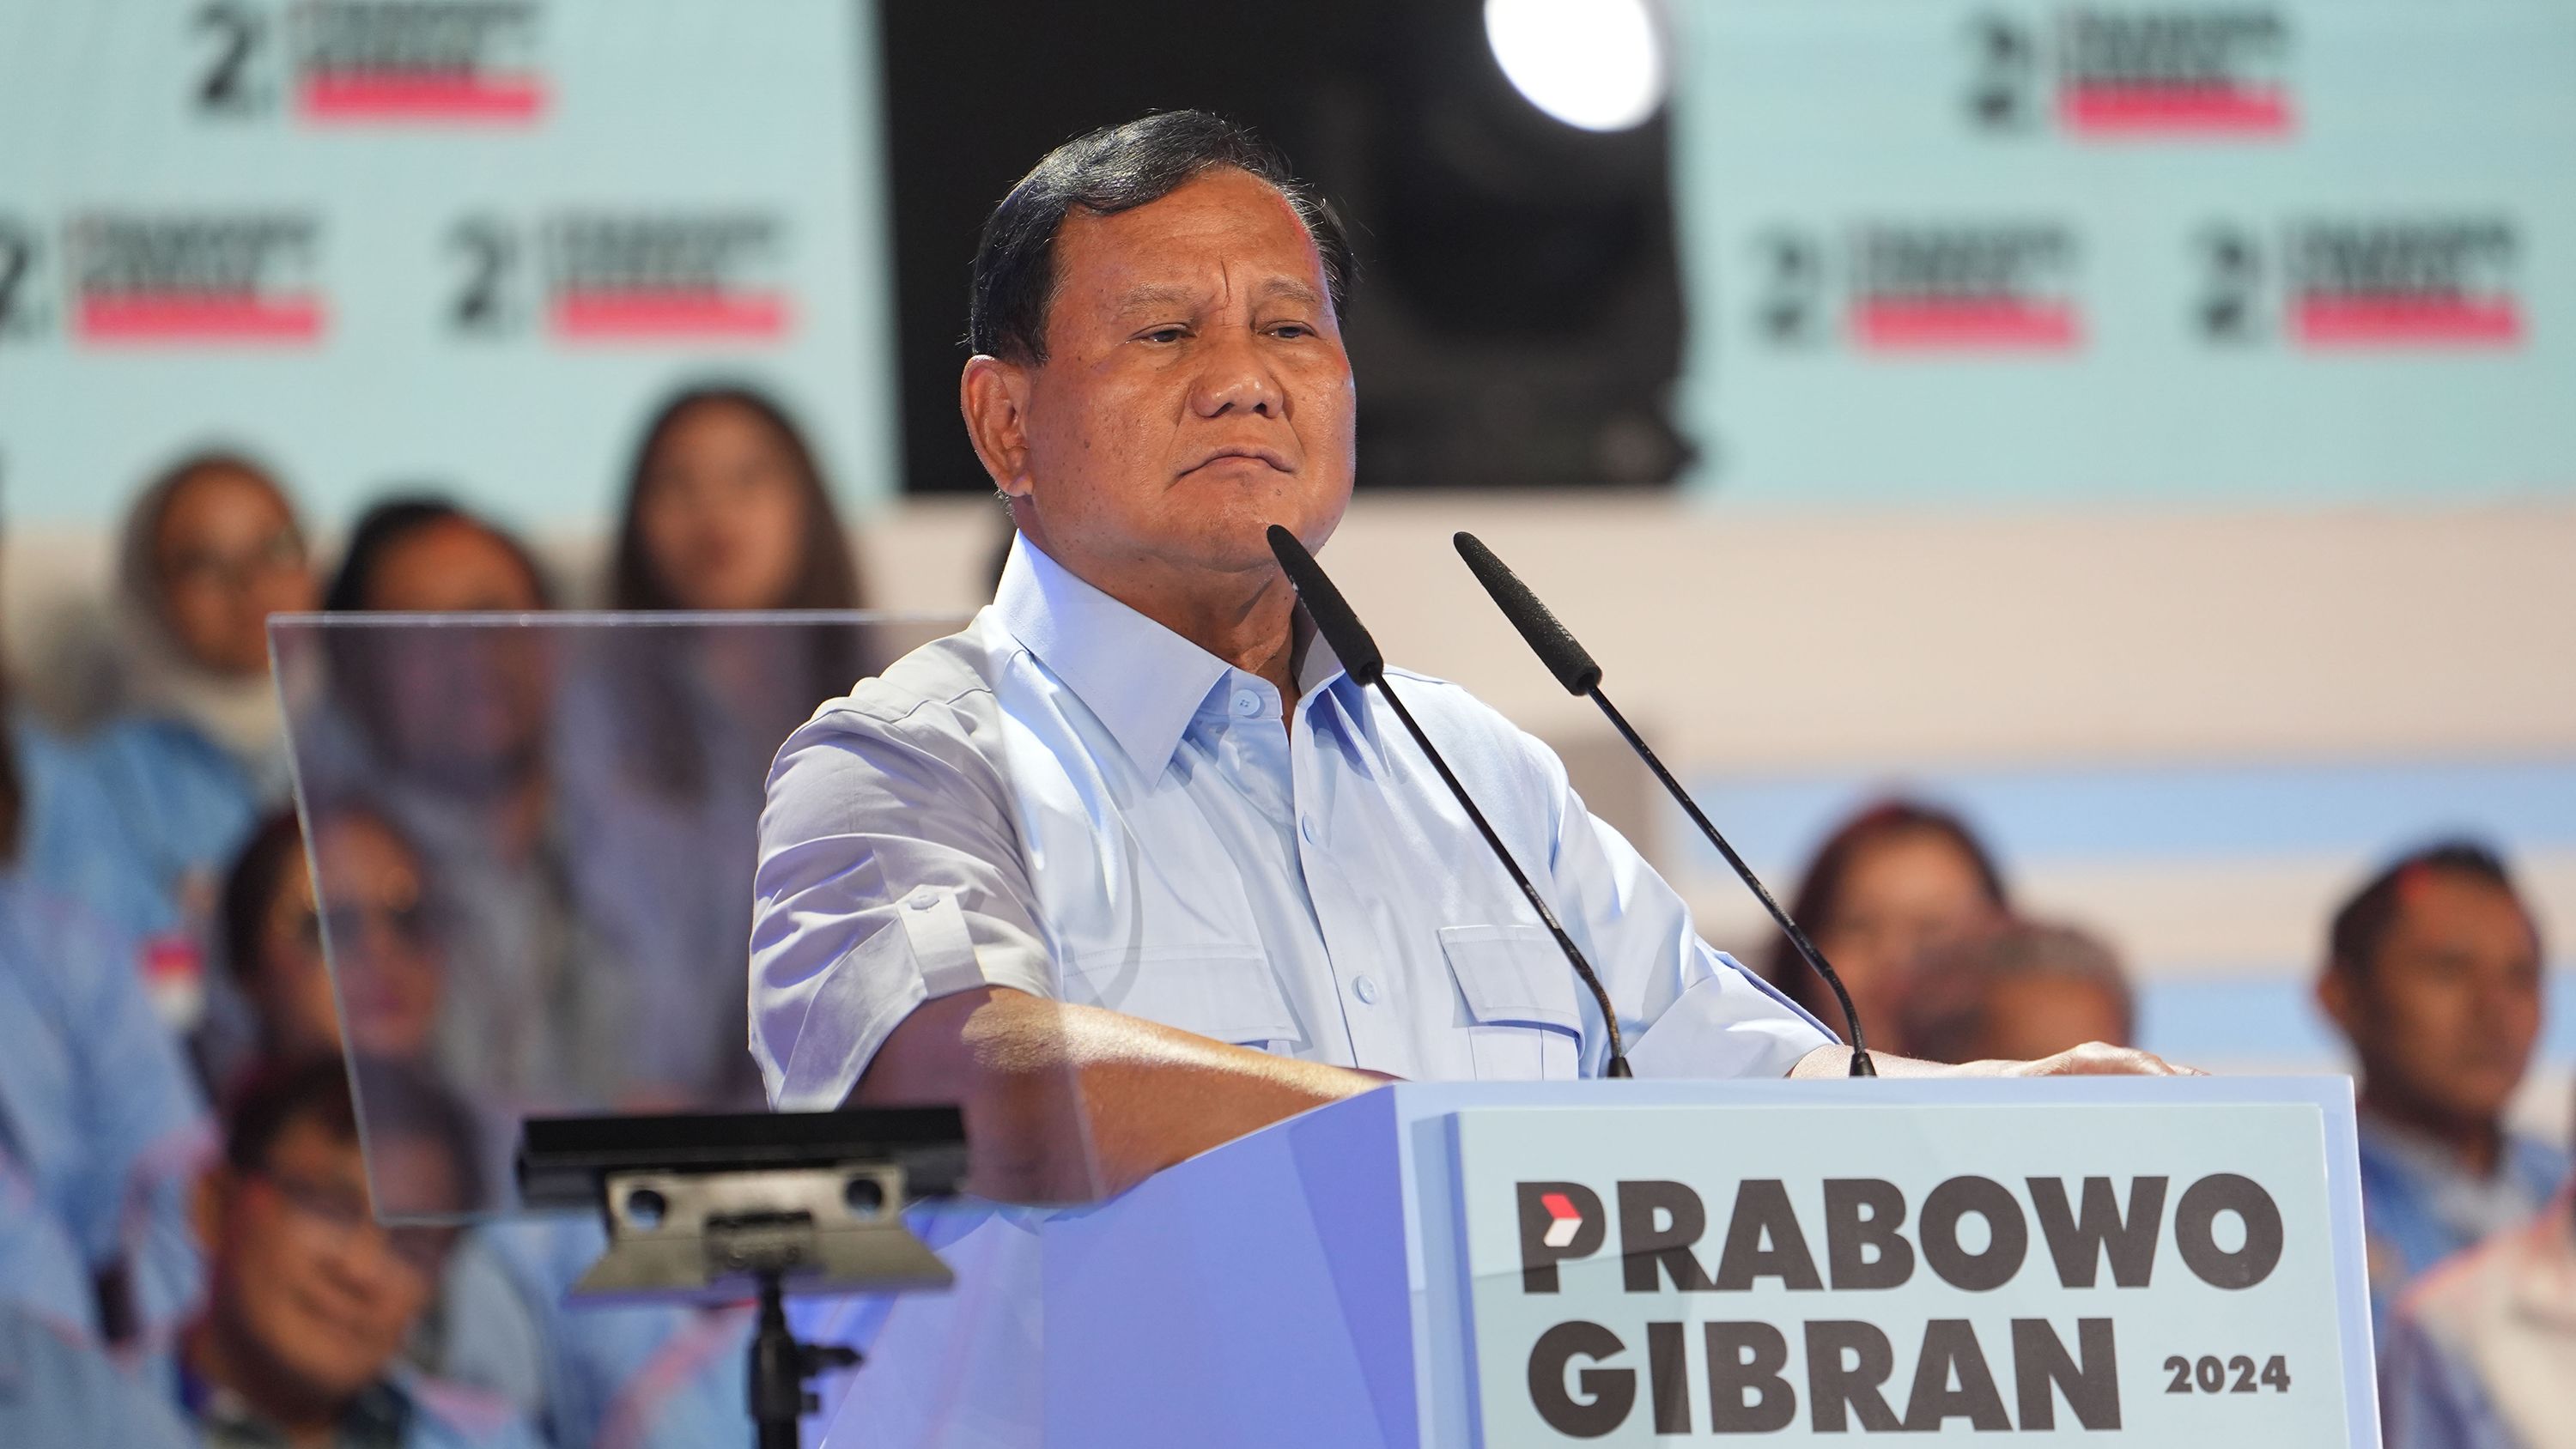 Prabowo Subianto attends a campaign event in Jakarta, Indonesia on January 27, 2024.